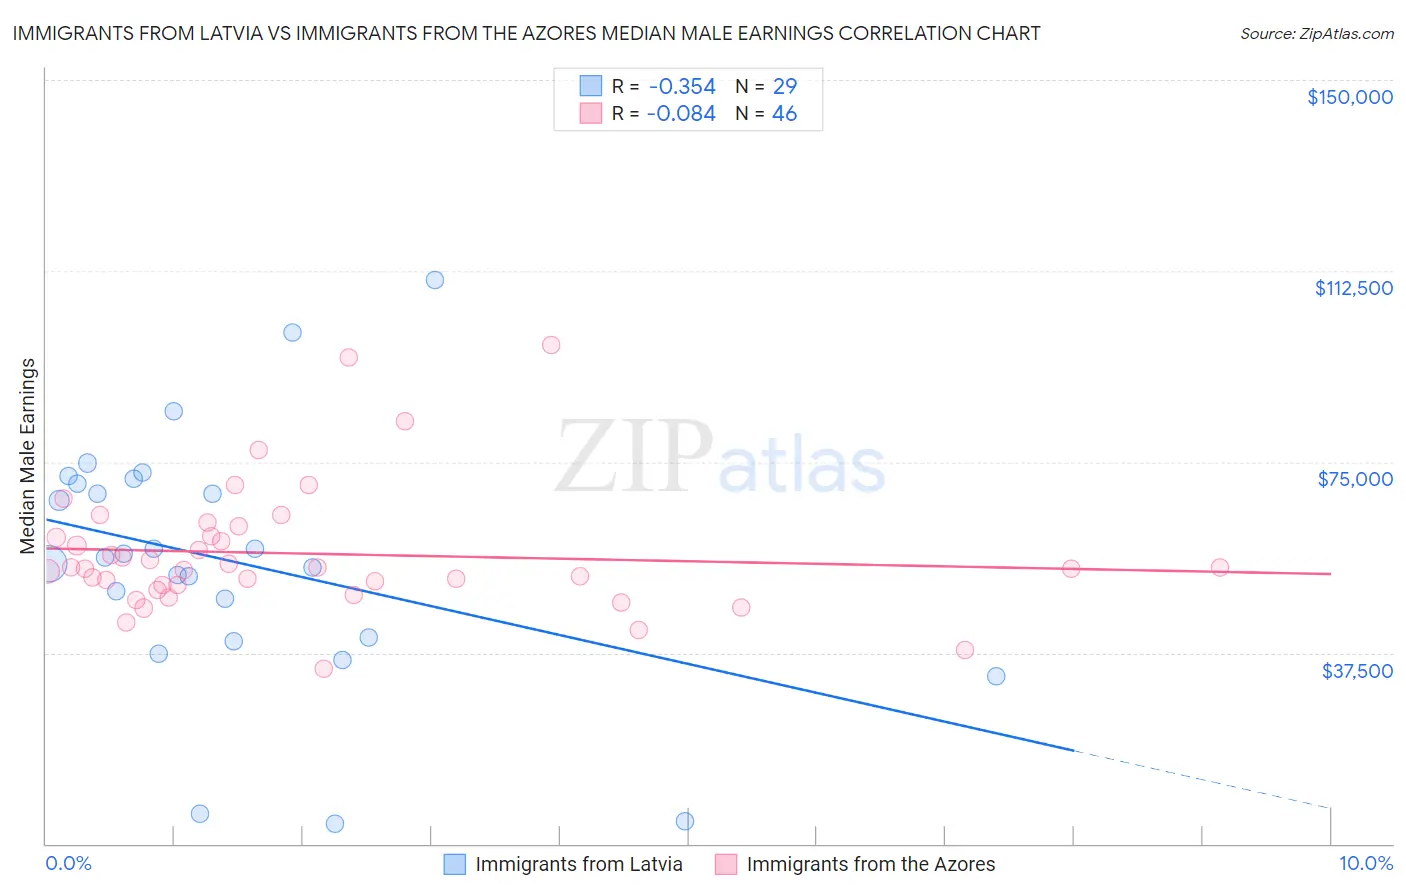 Immigrants from Latvia vs Immigrants from the Azores Median Male Earnings